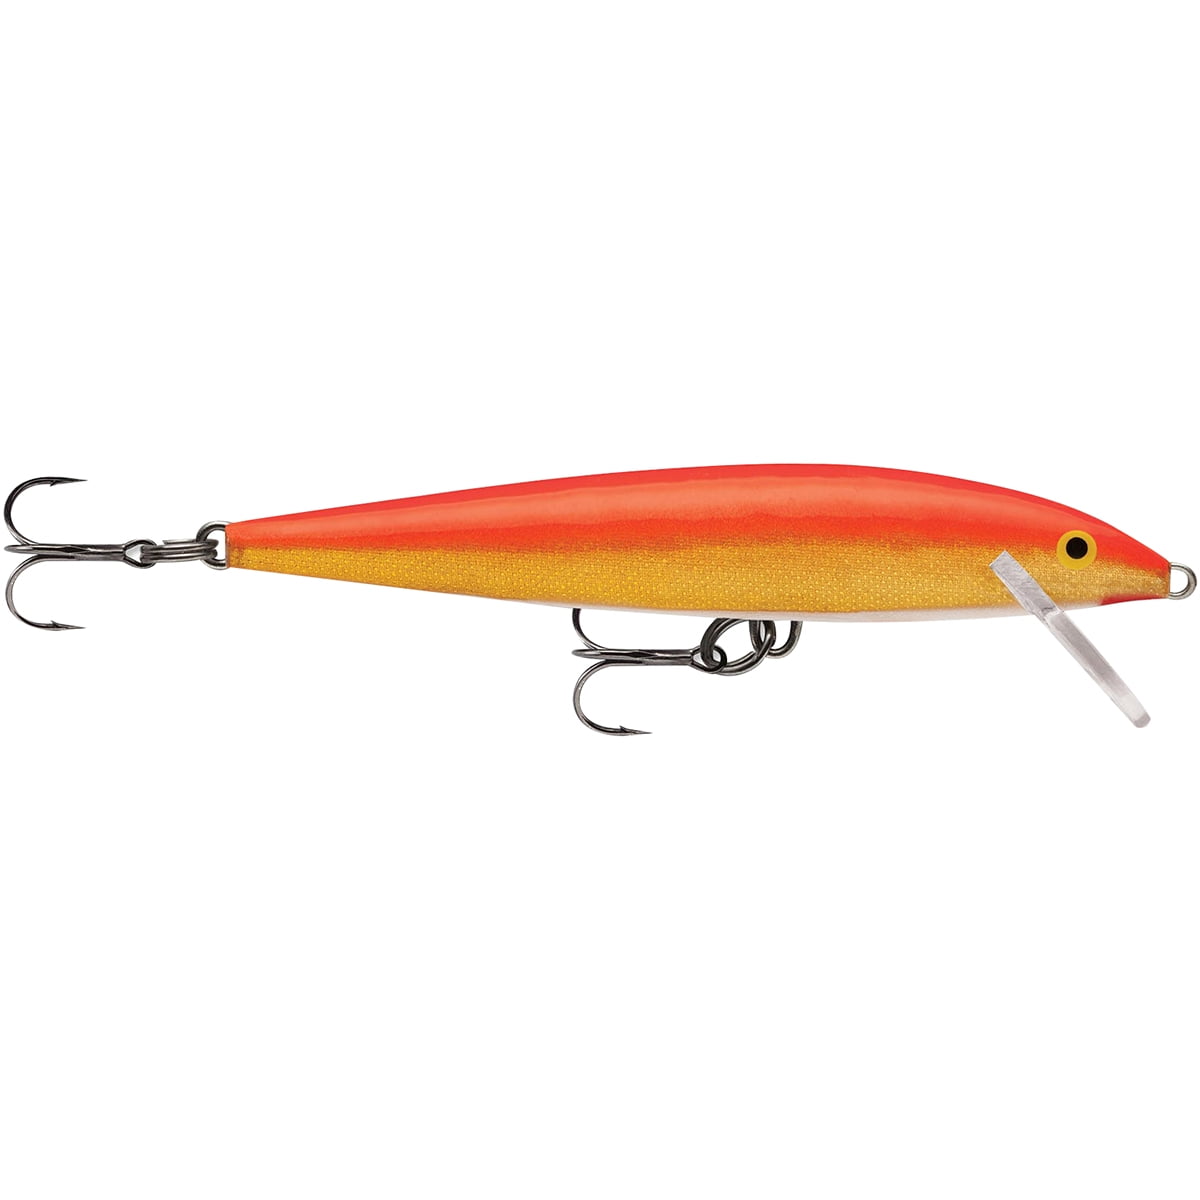 Rapala Original Floating 03 Fishing Lure - Gold Fluorescent Red